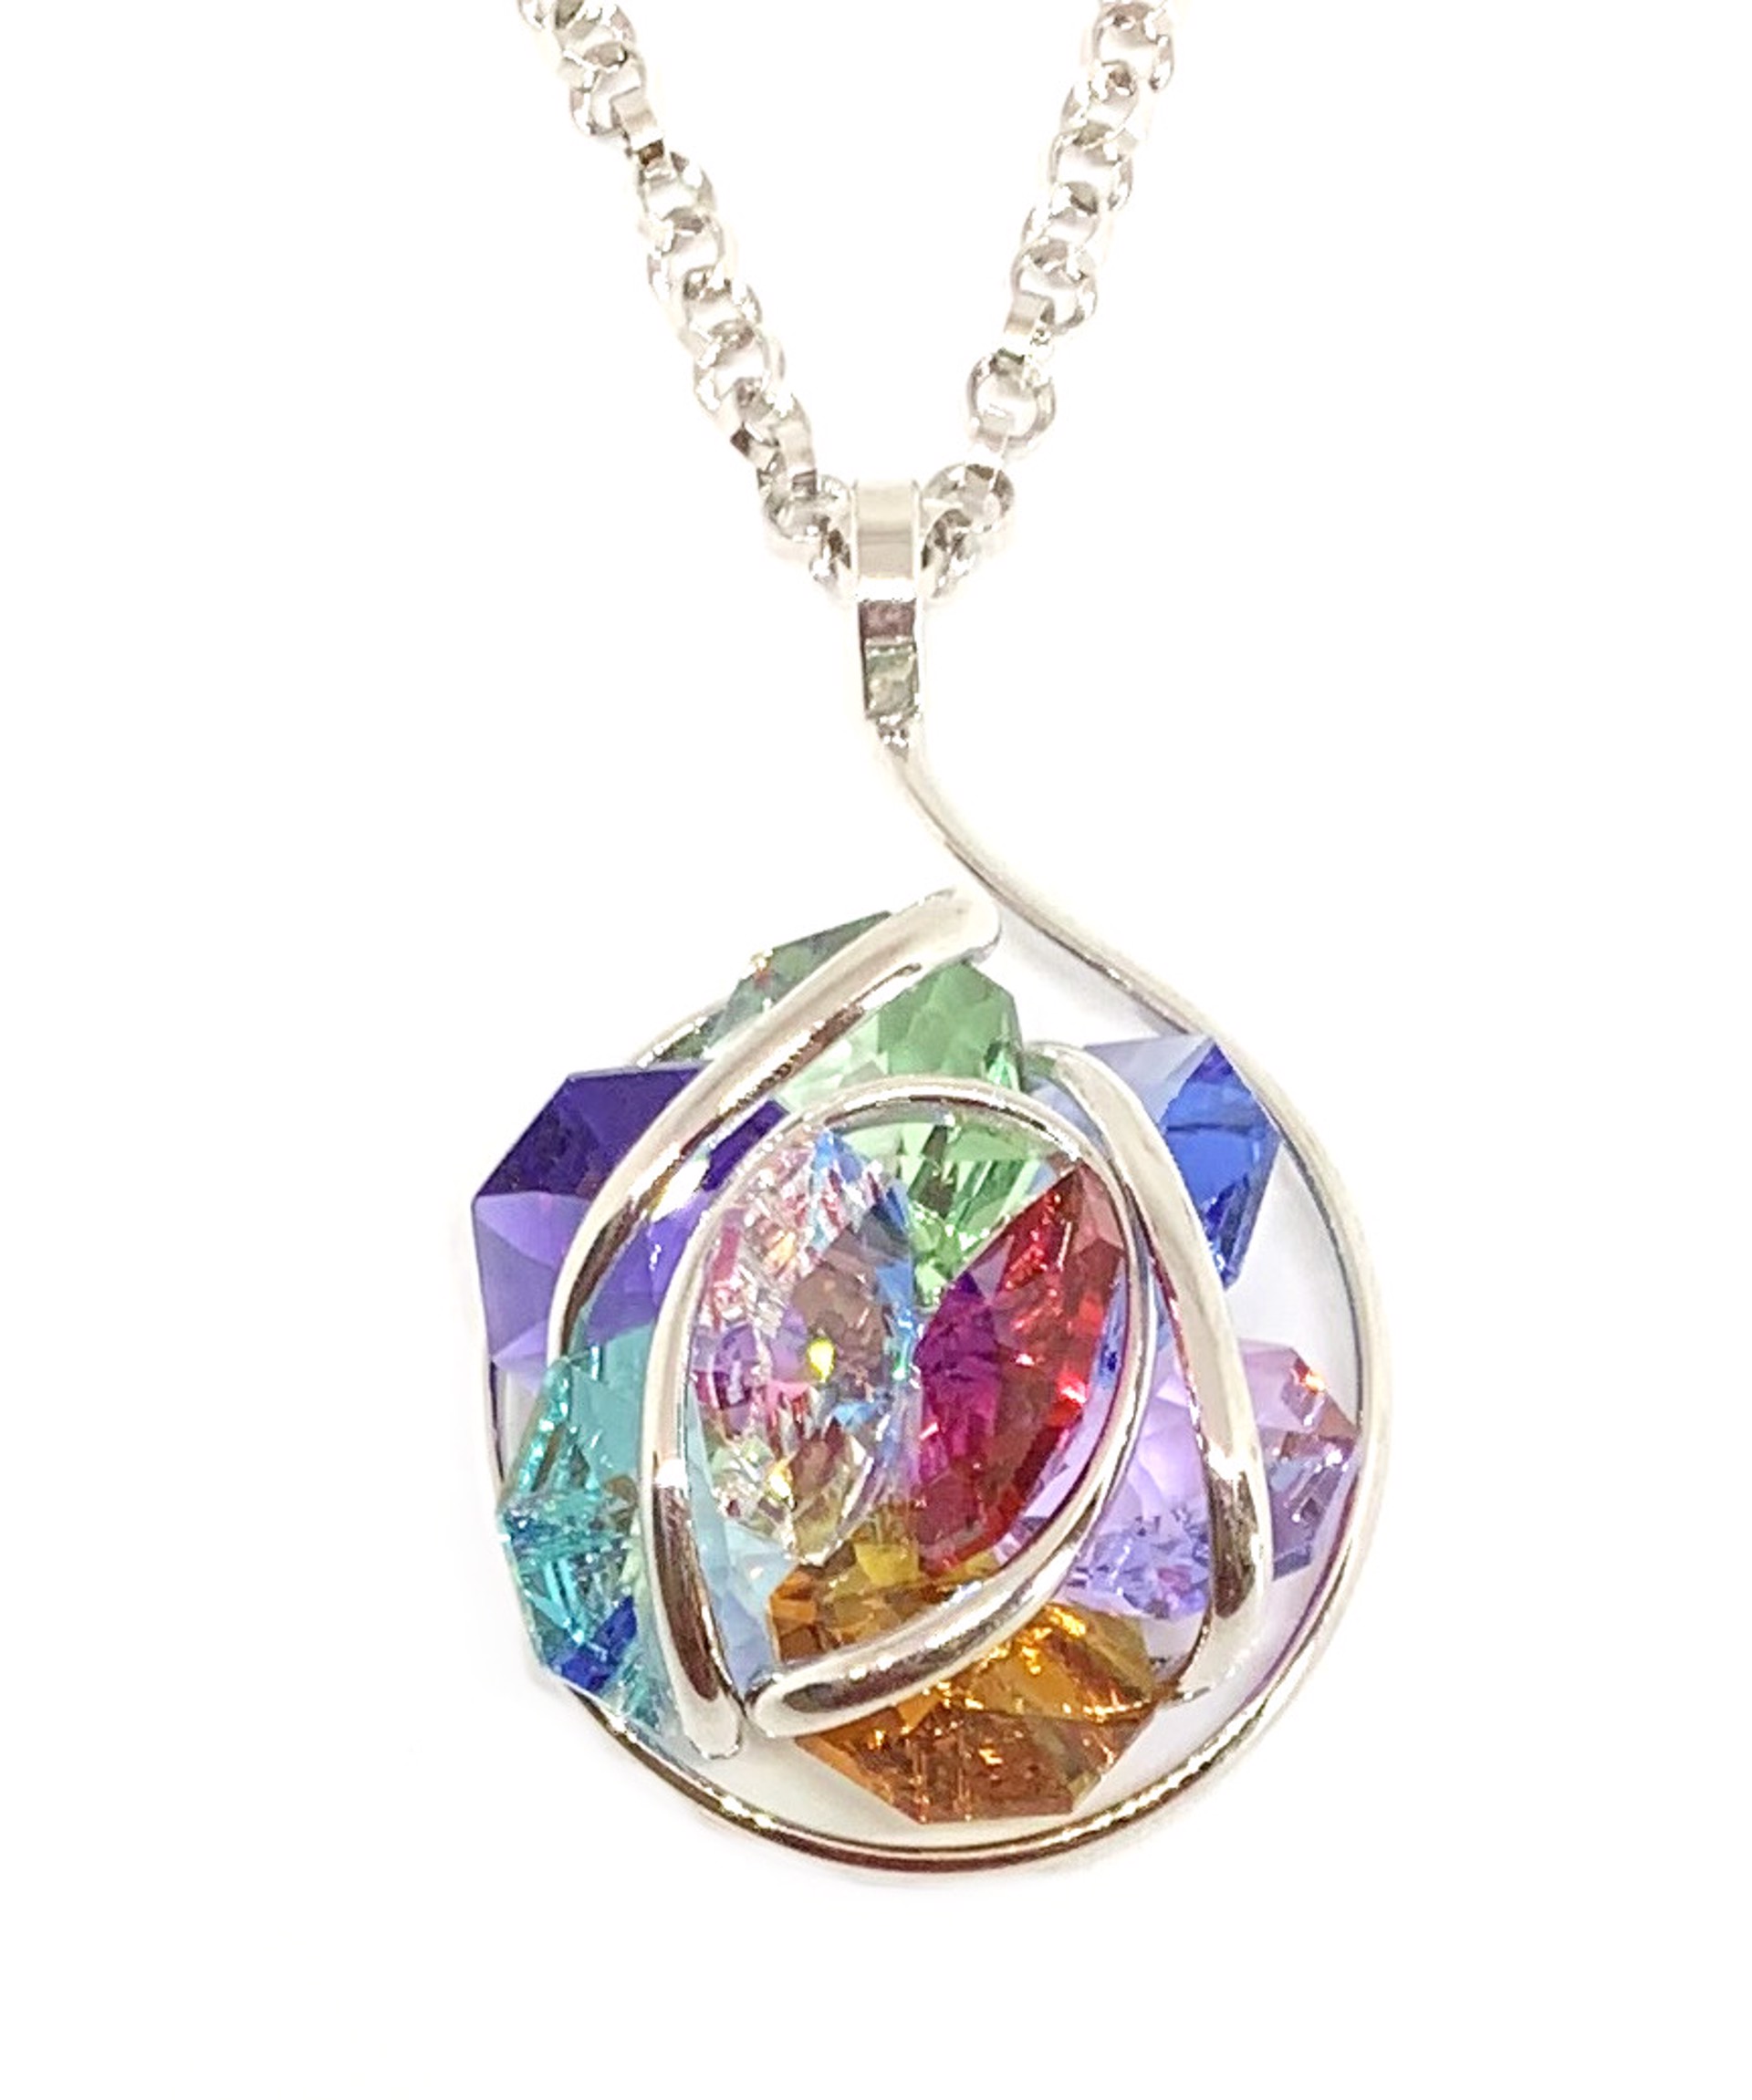 Multi Colored Swarovski Crystal Cluster Pendant, Handmade & Triple Rhodium Plated by Monique Touber